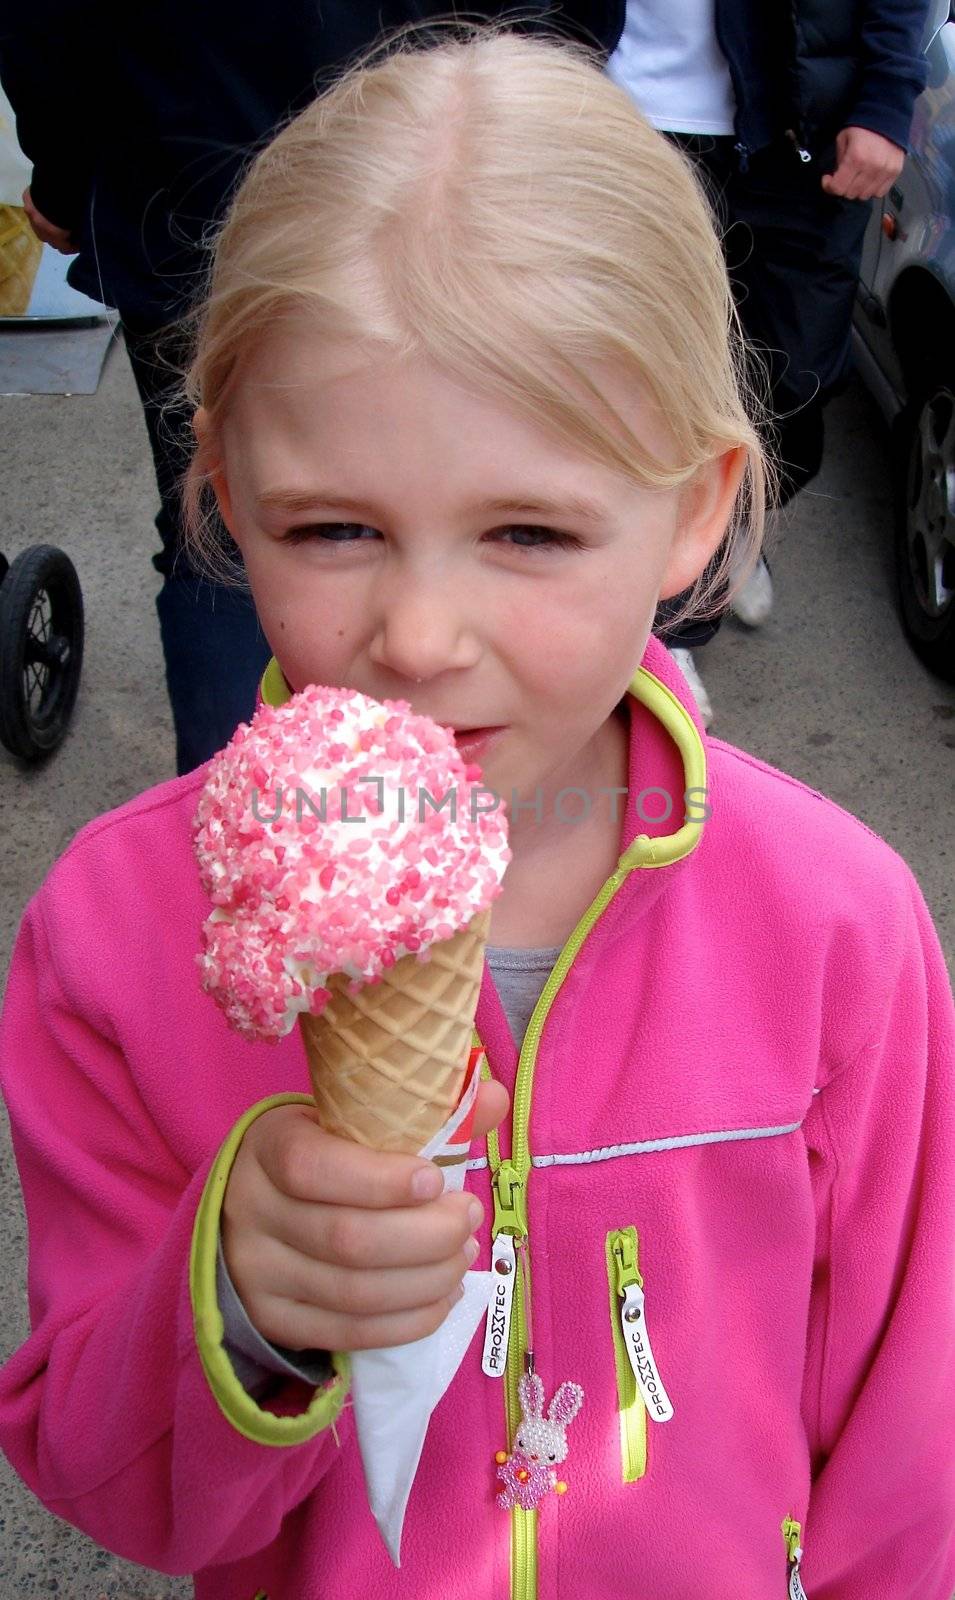 a girl is eating the ice cream. Please note: No negative use allowed.